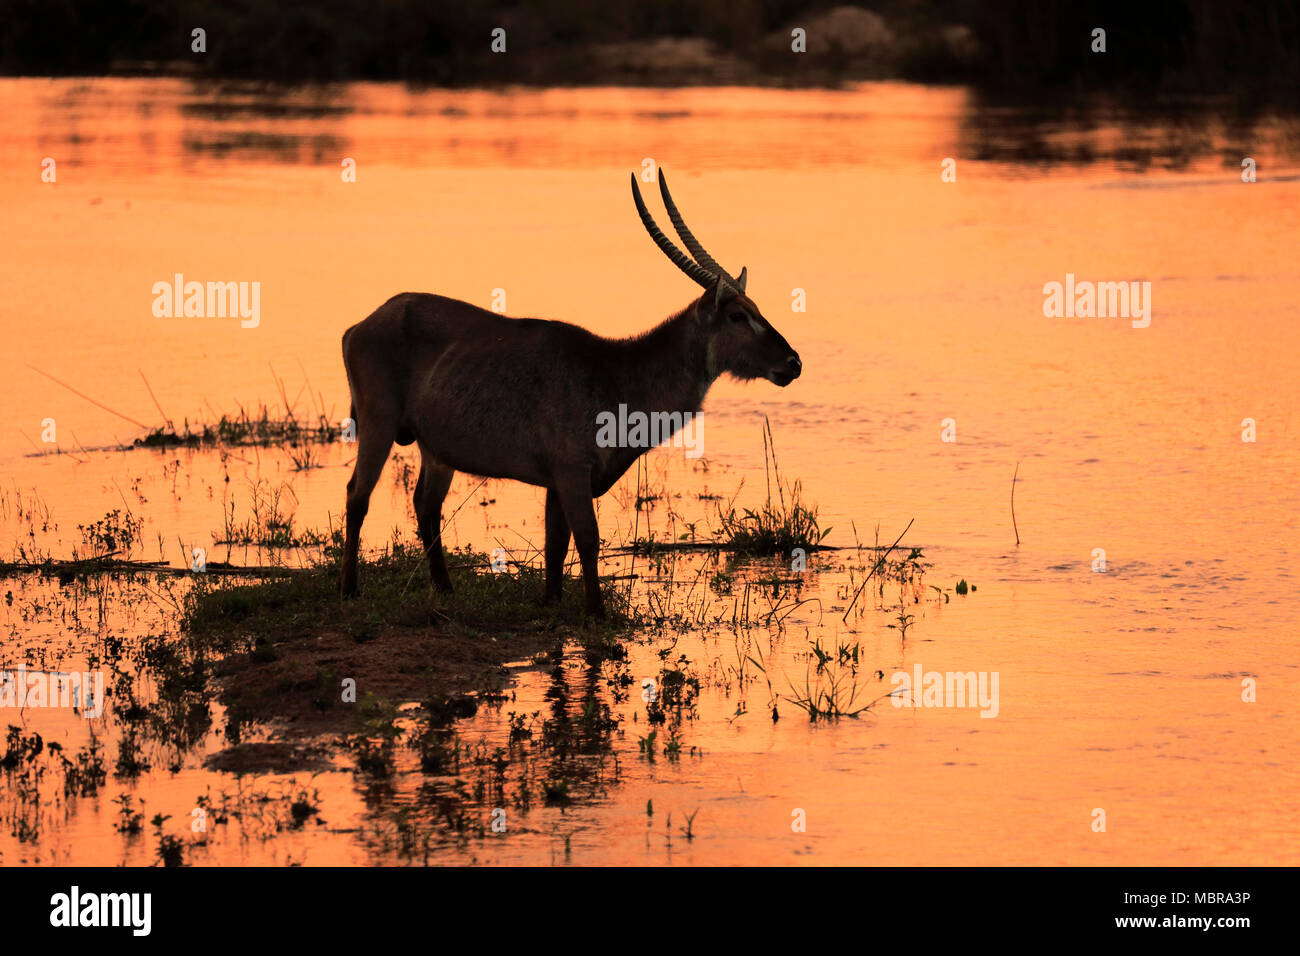 Ellipsen waterbuck (Kobus ellipsiprymnus), adult male on the water, silhouette, sunset, Kruger National Park, South Africa Stock Photo